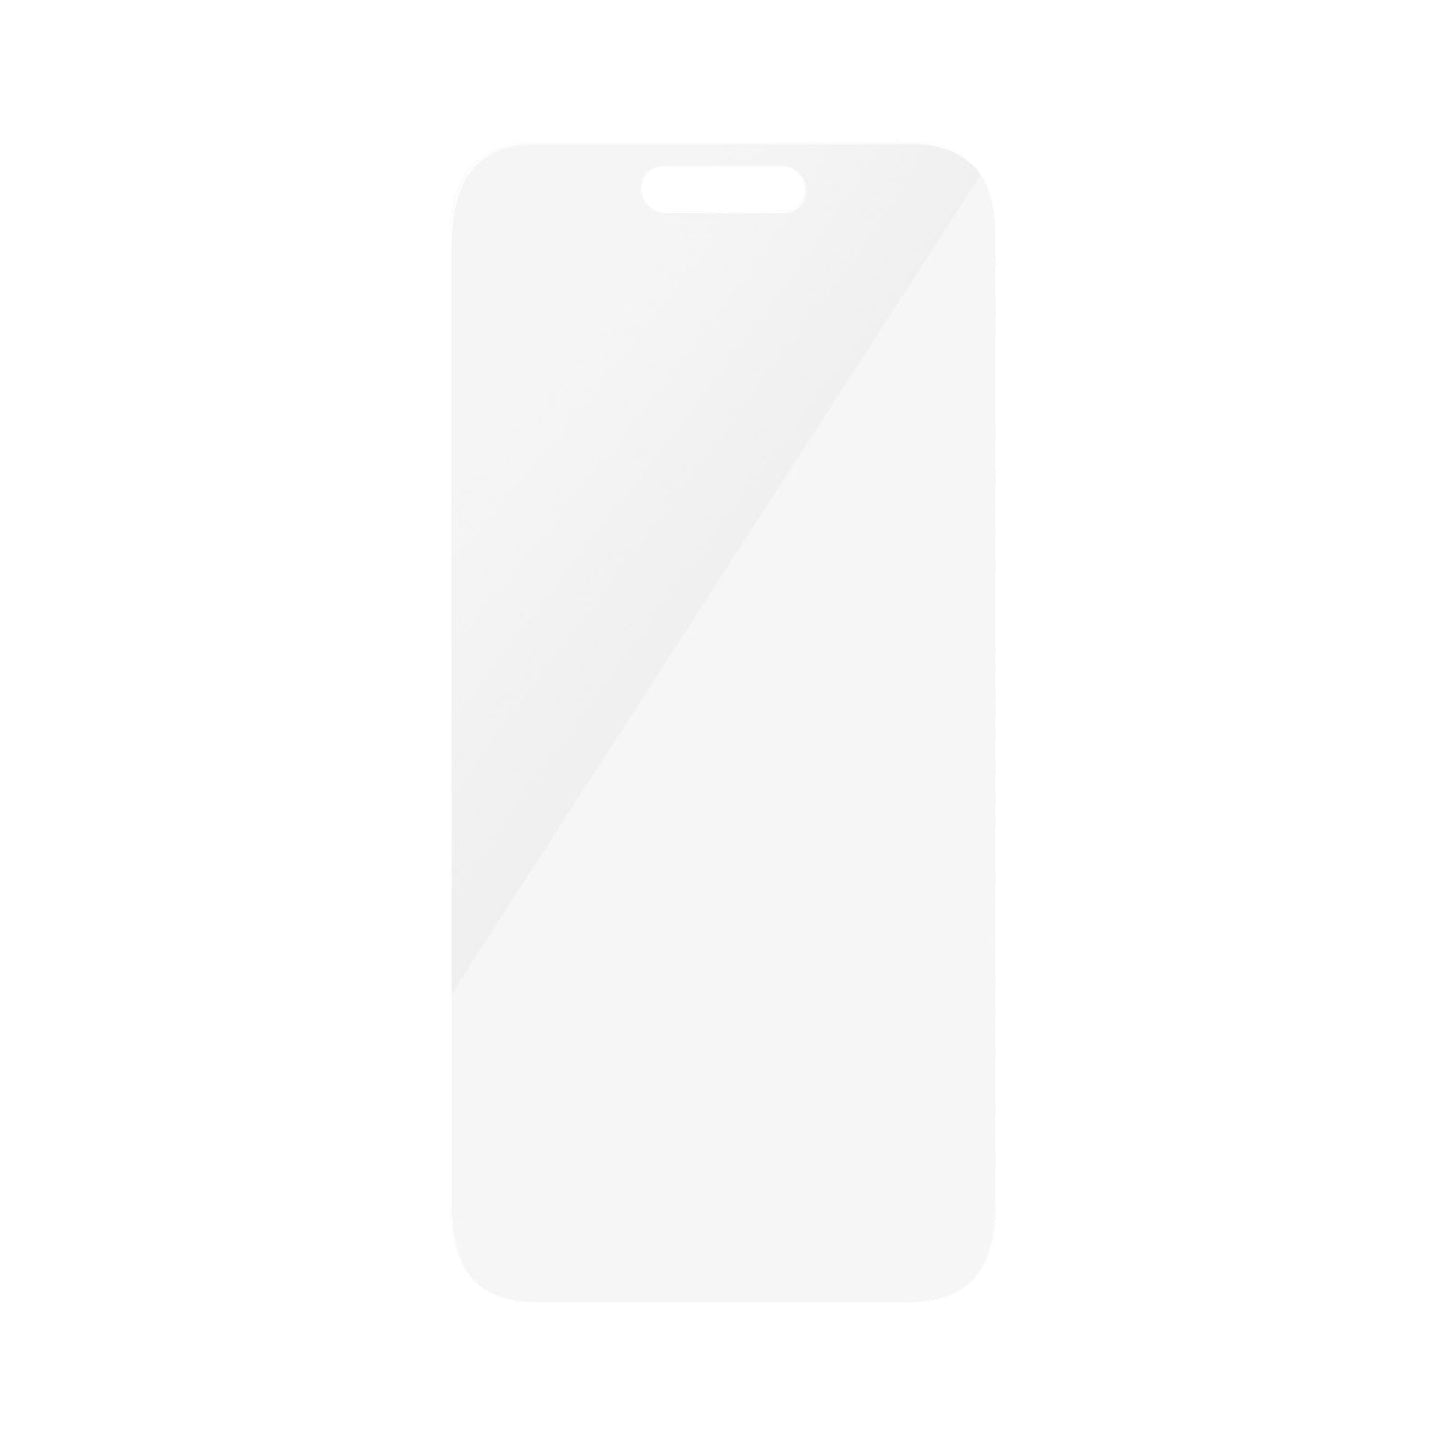 PANZERGLASS Classic Fit for iPhone 15 - Clear